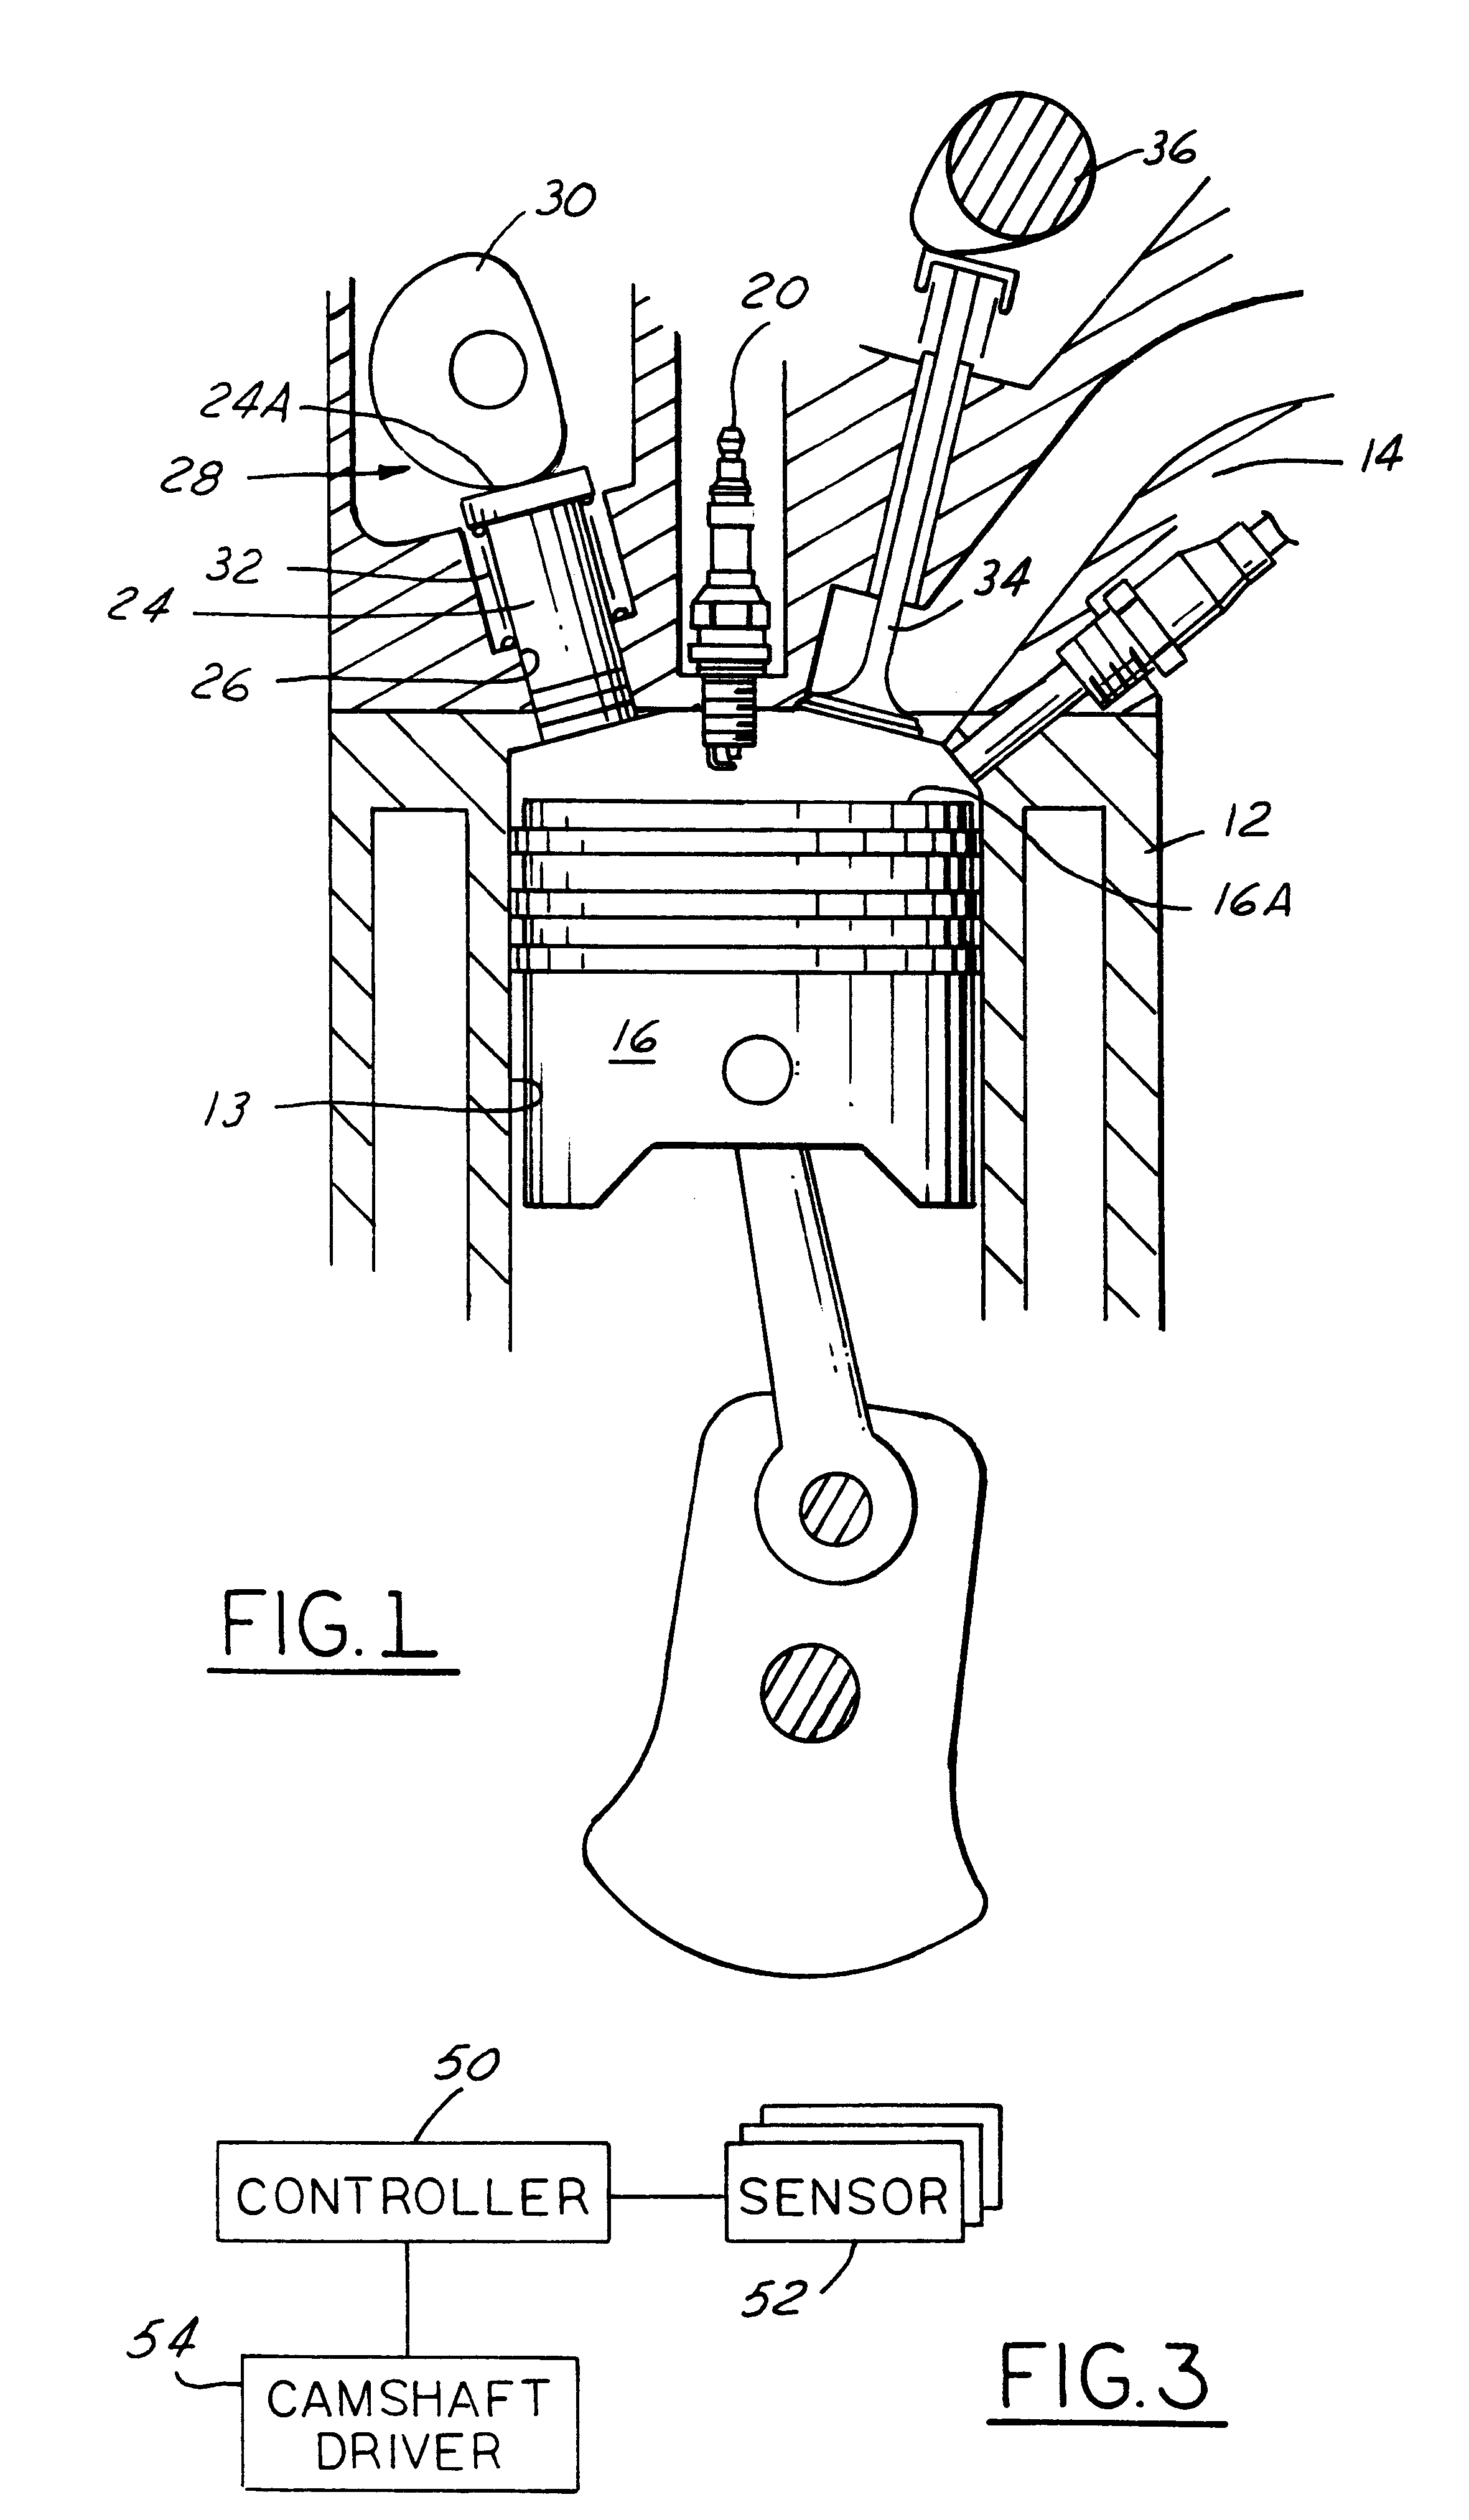 Homogeneous charge compression ignition internal combustion engine